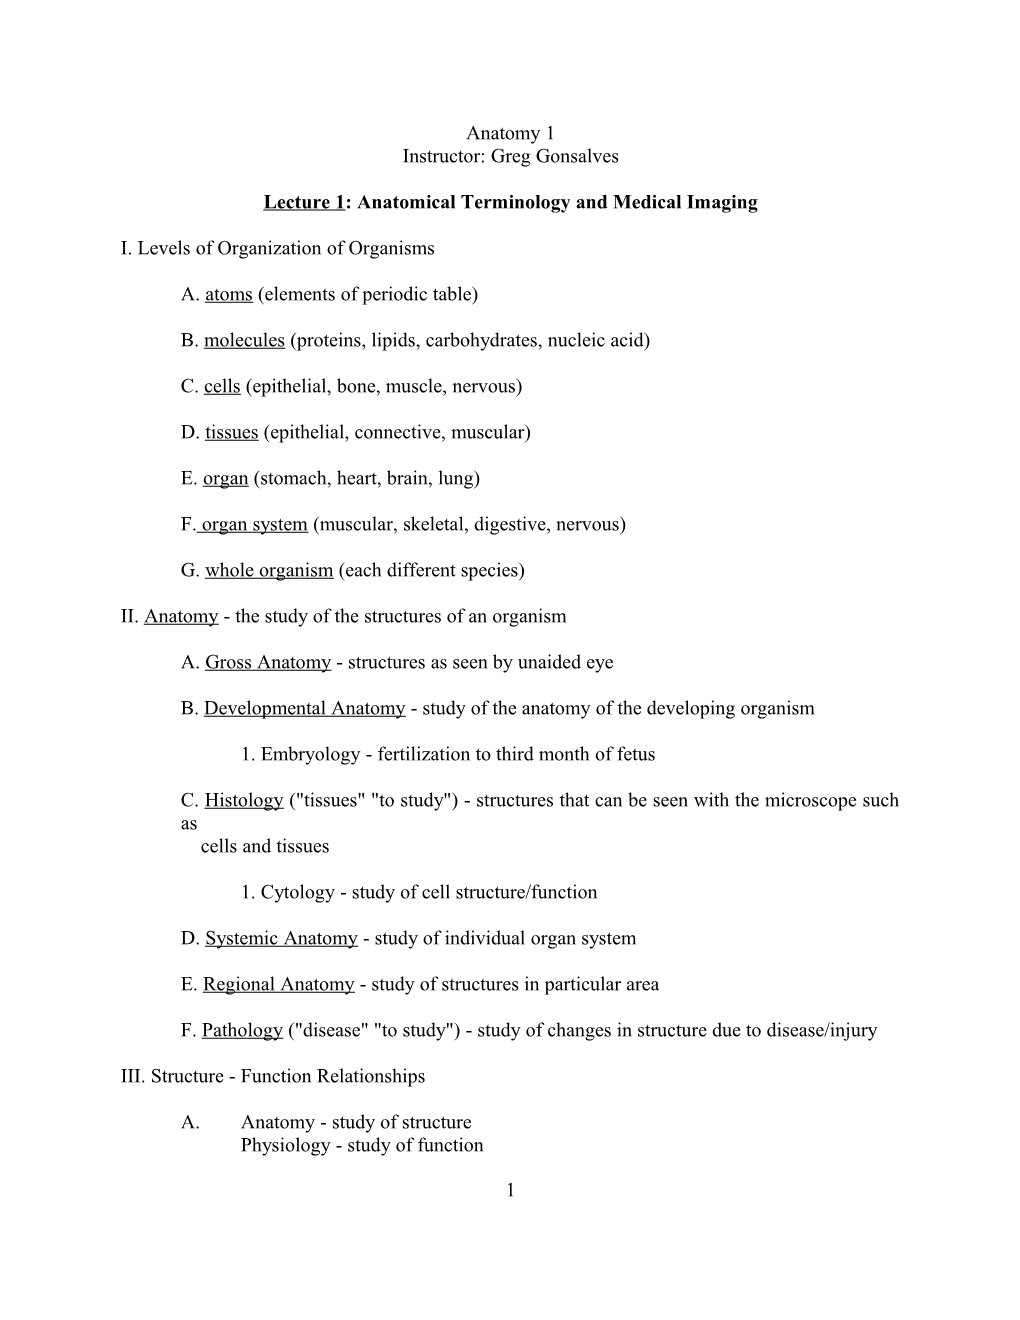 Lecture 1: Anatomical Terminology and Medical Imaging